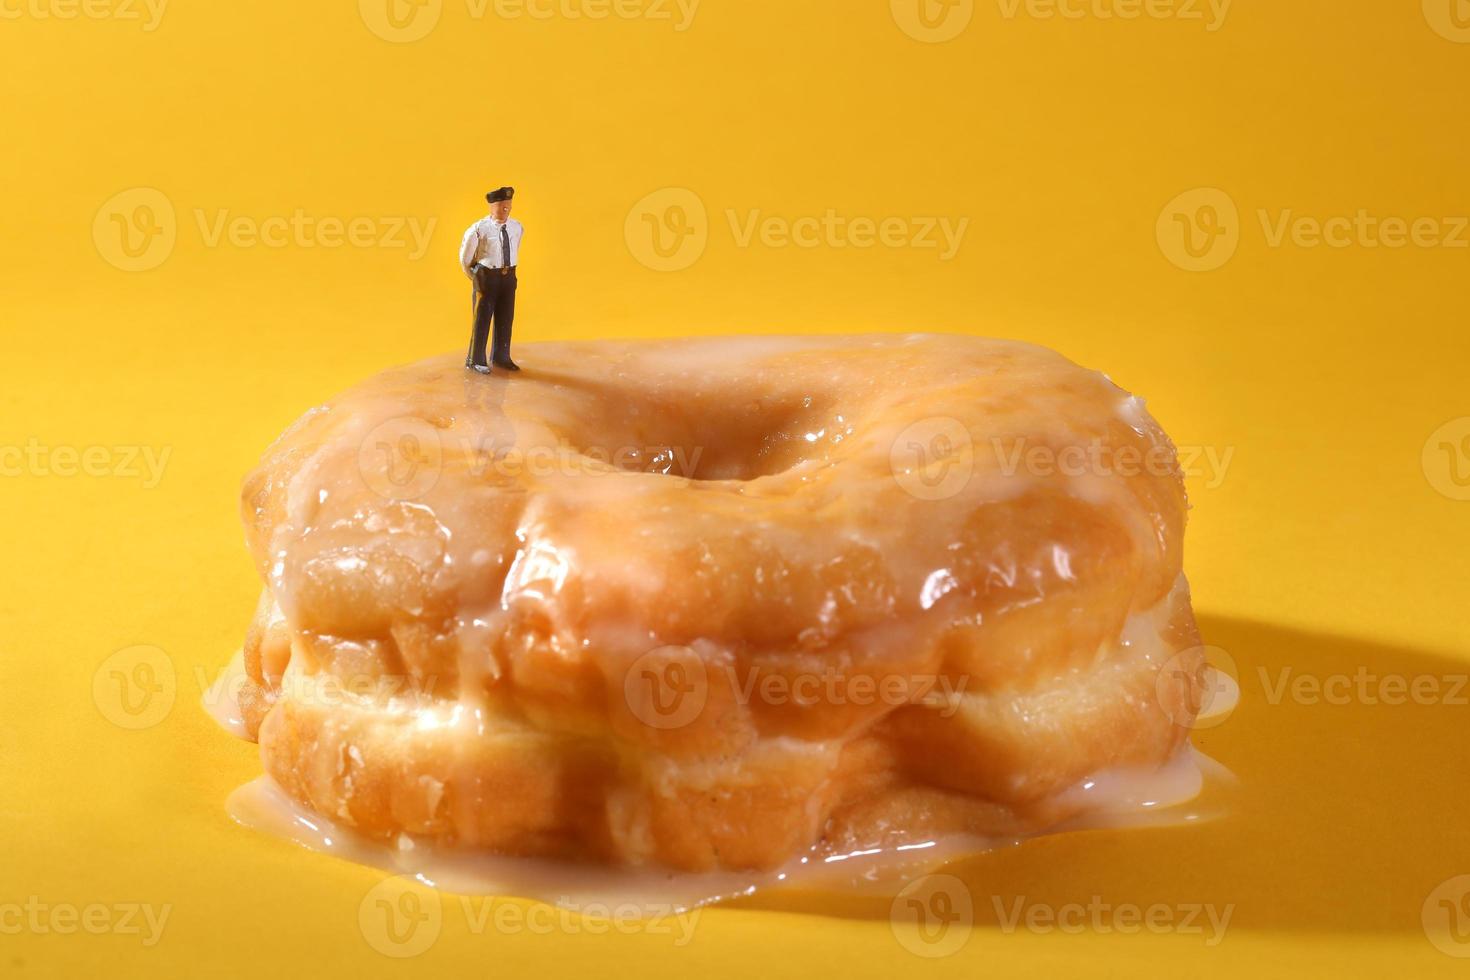 Police Officers in Conceptual Food Imagery With Doughnuts photo